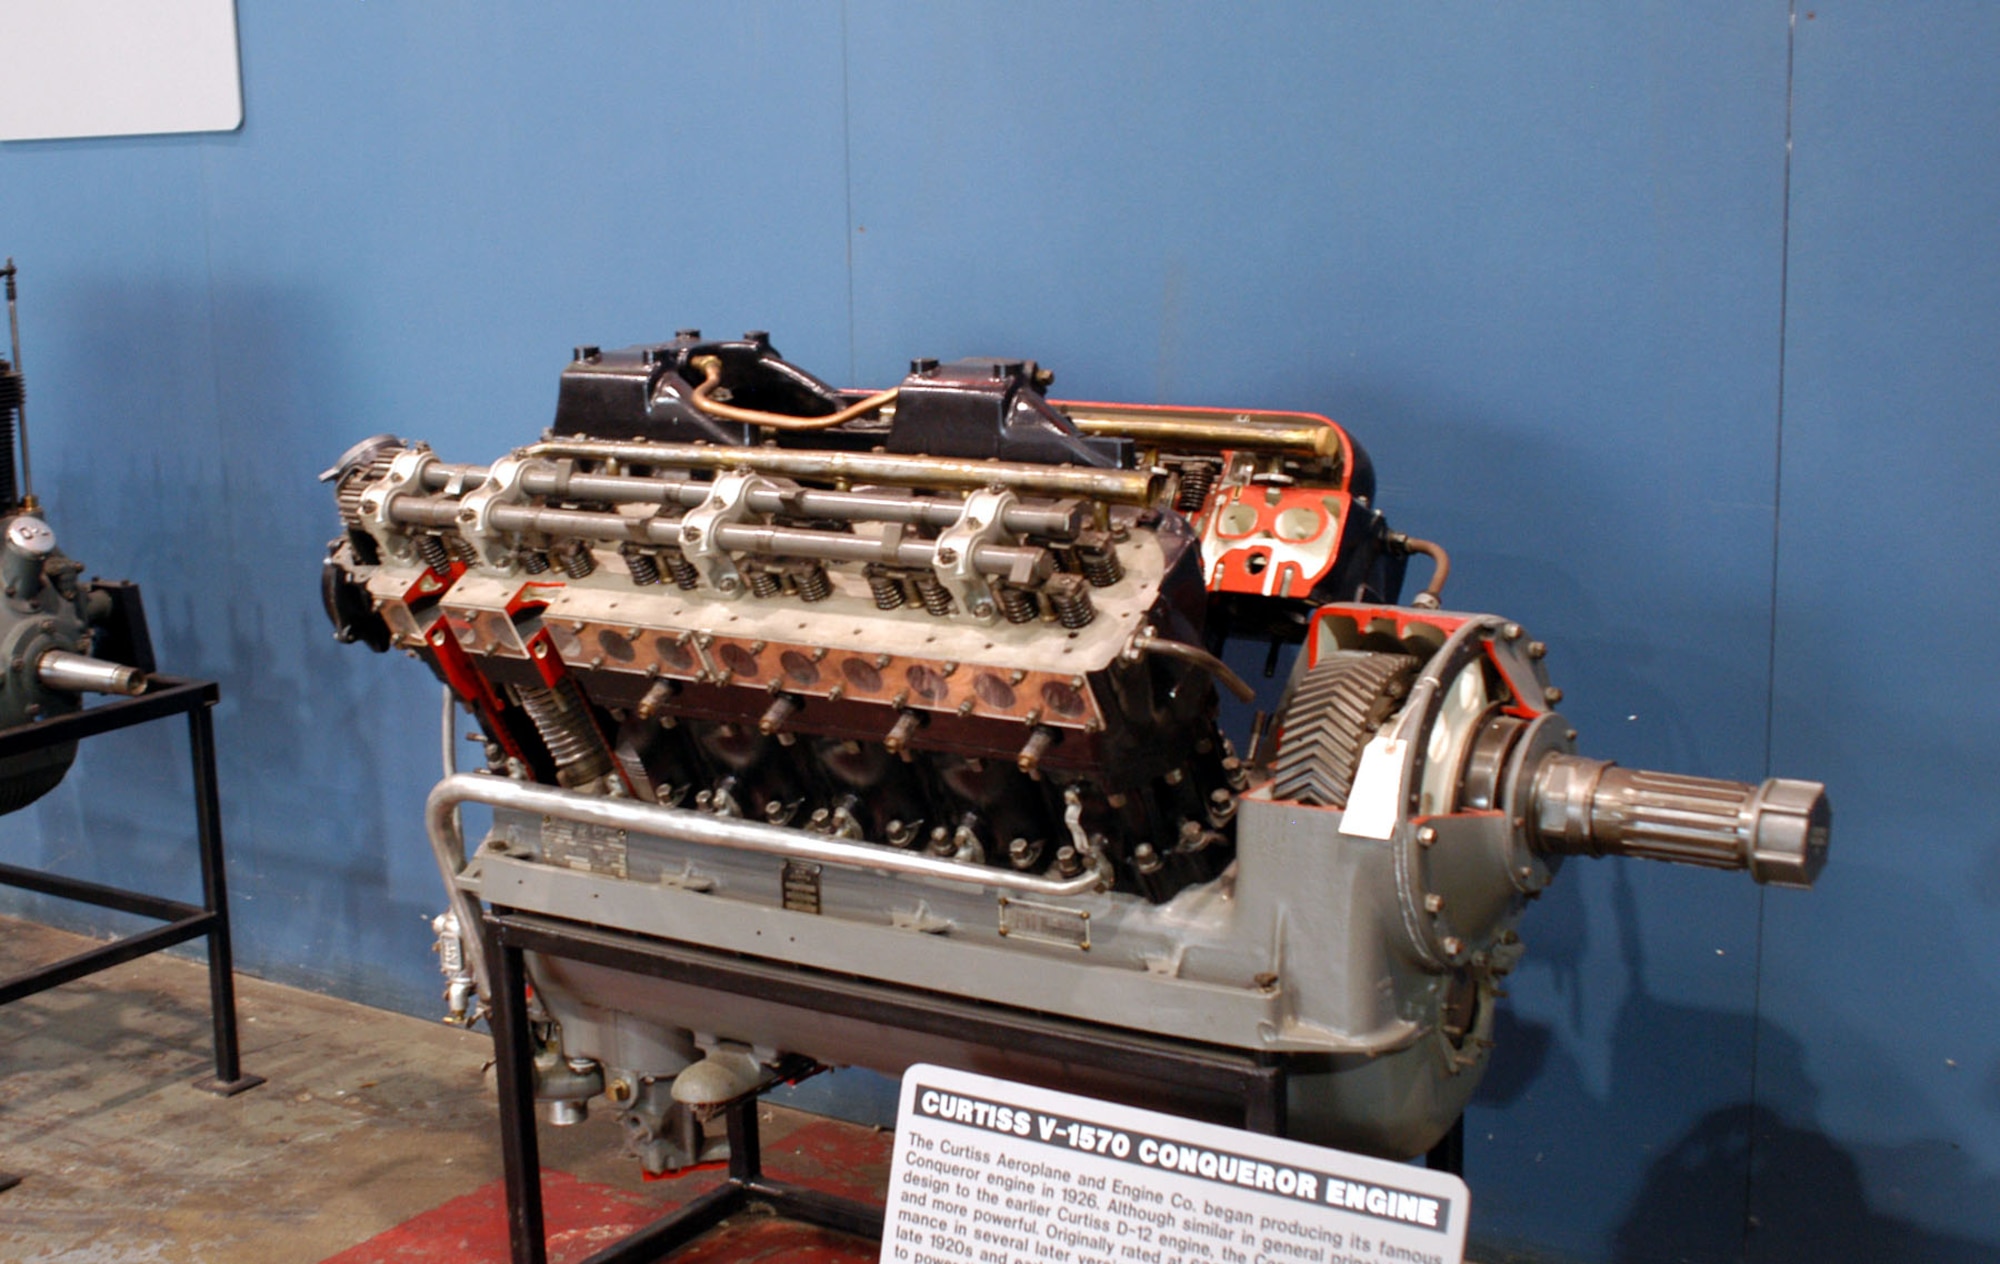 DAYTON, Ohio -- Curtiss V-1570 Conqueror engine on display in the Research & Development Gallery at the National Museum of the United States Air Force. (U.S. Air Force photo)